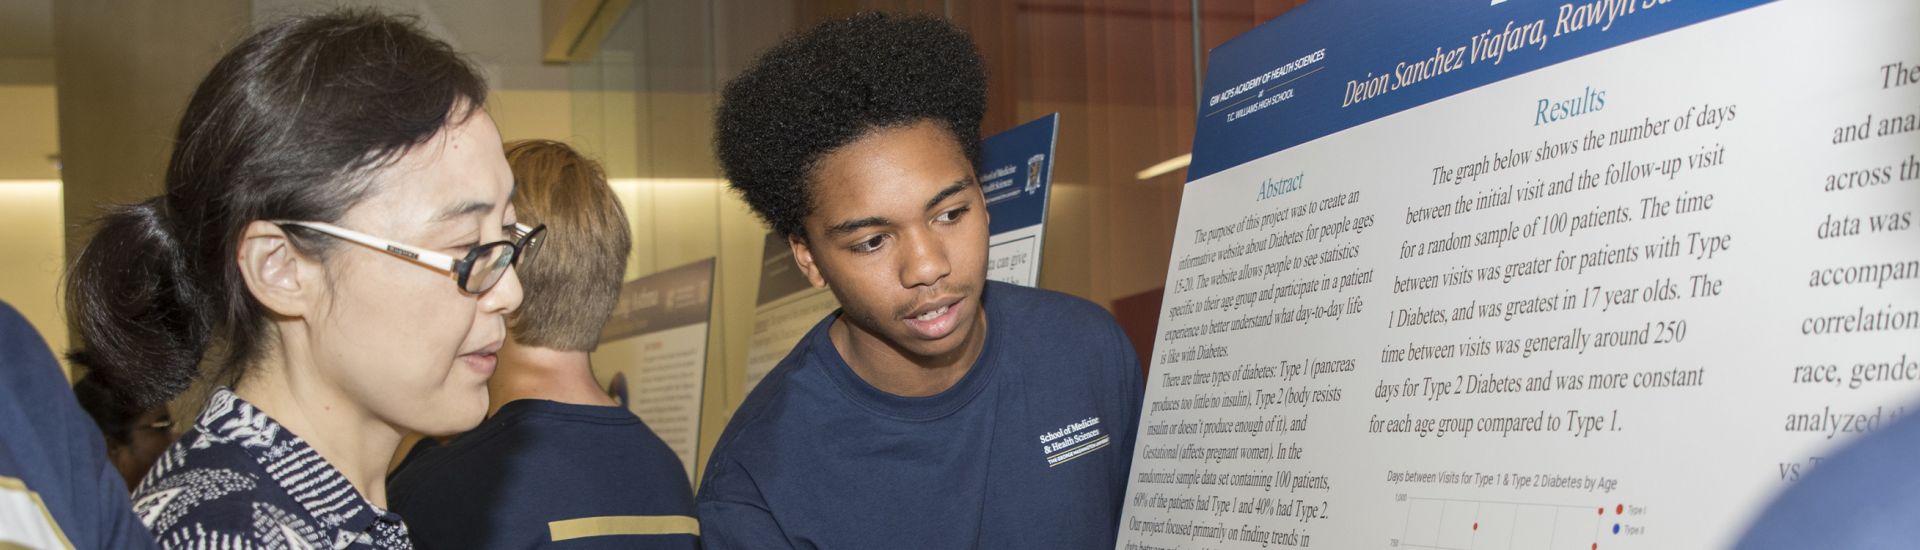 Student showing an adult a research poster